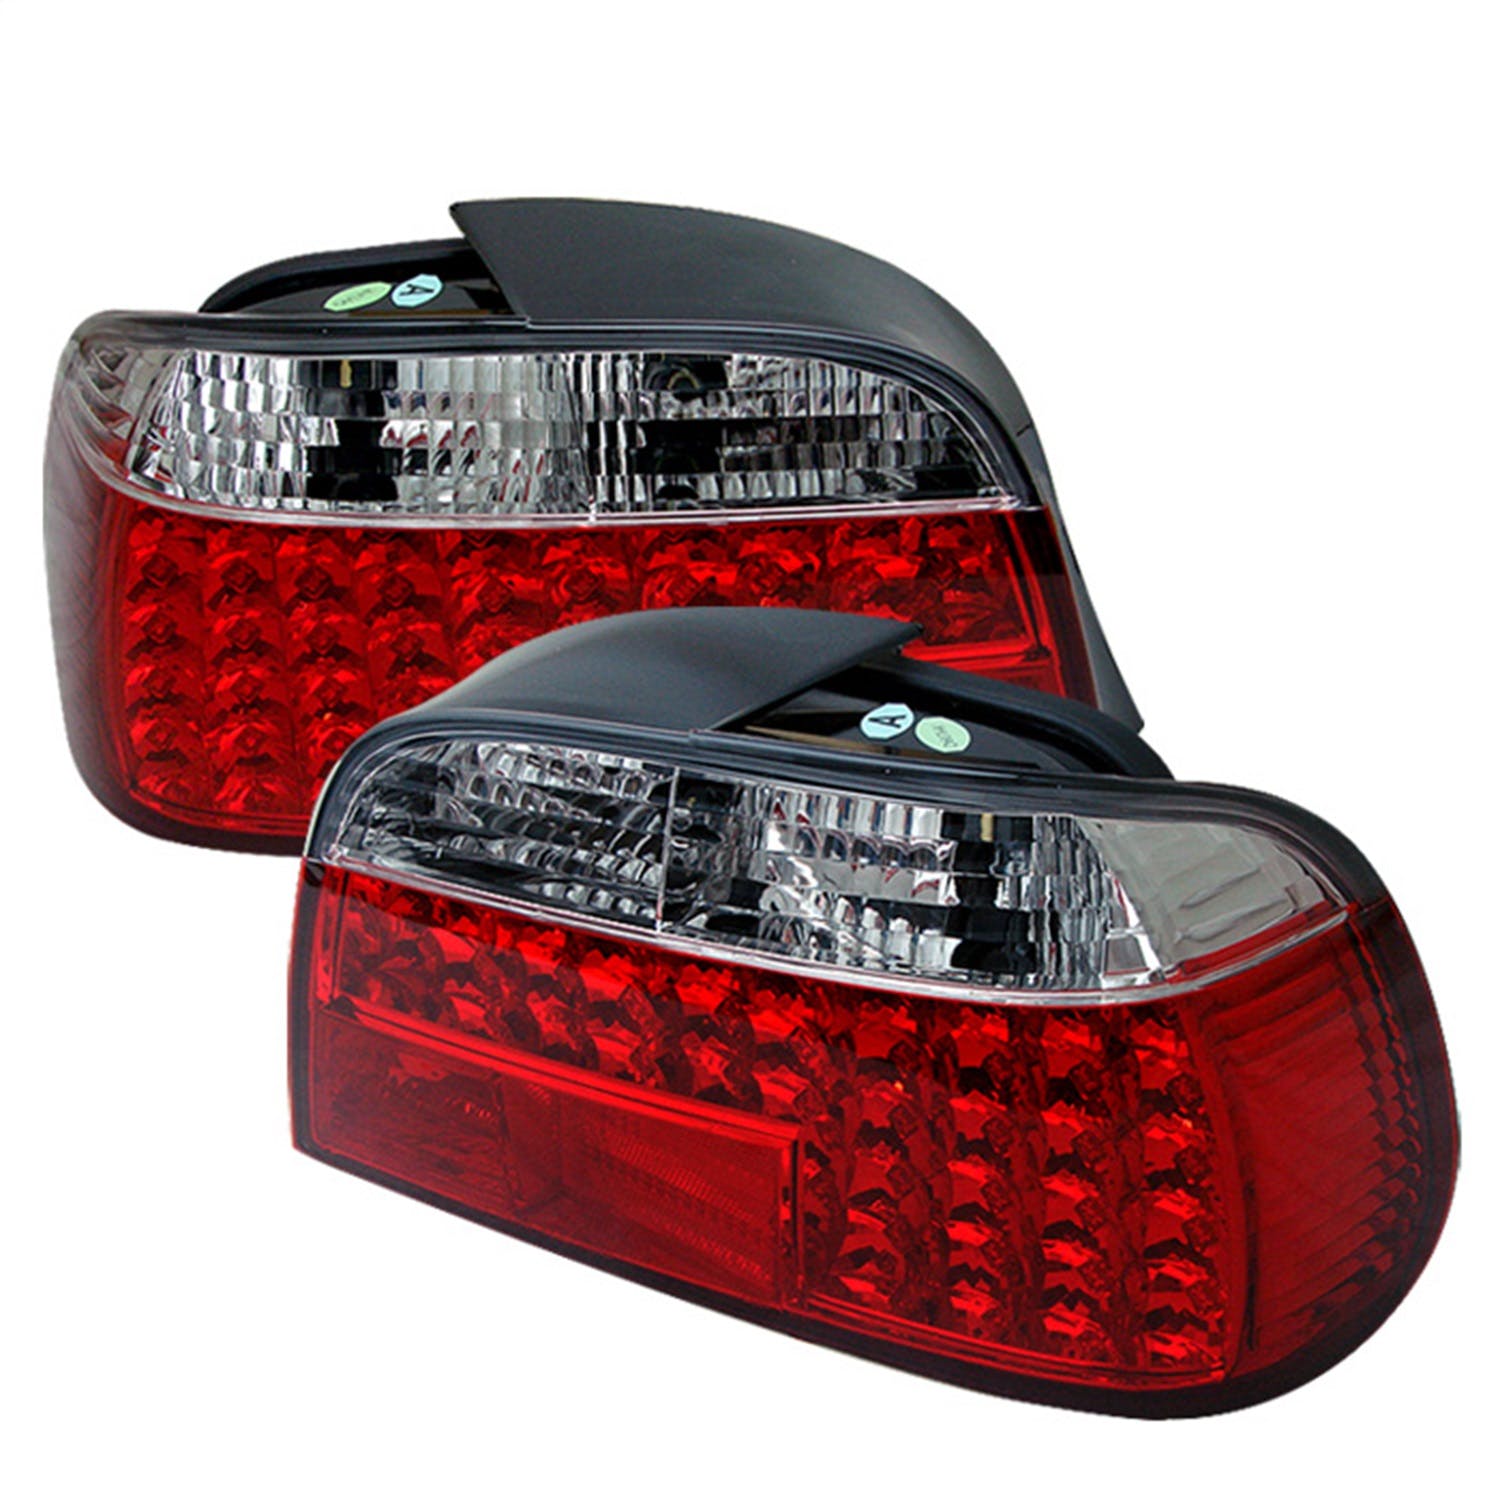 Spyder Auto 5000620 (Spyder) BMW E38 7-Series 95-01 LED Tail Lights-Red Clear